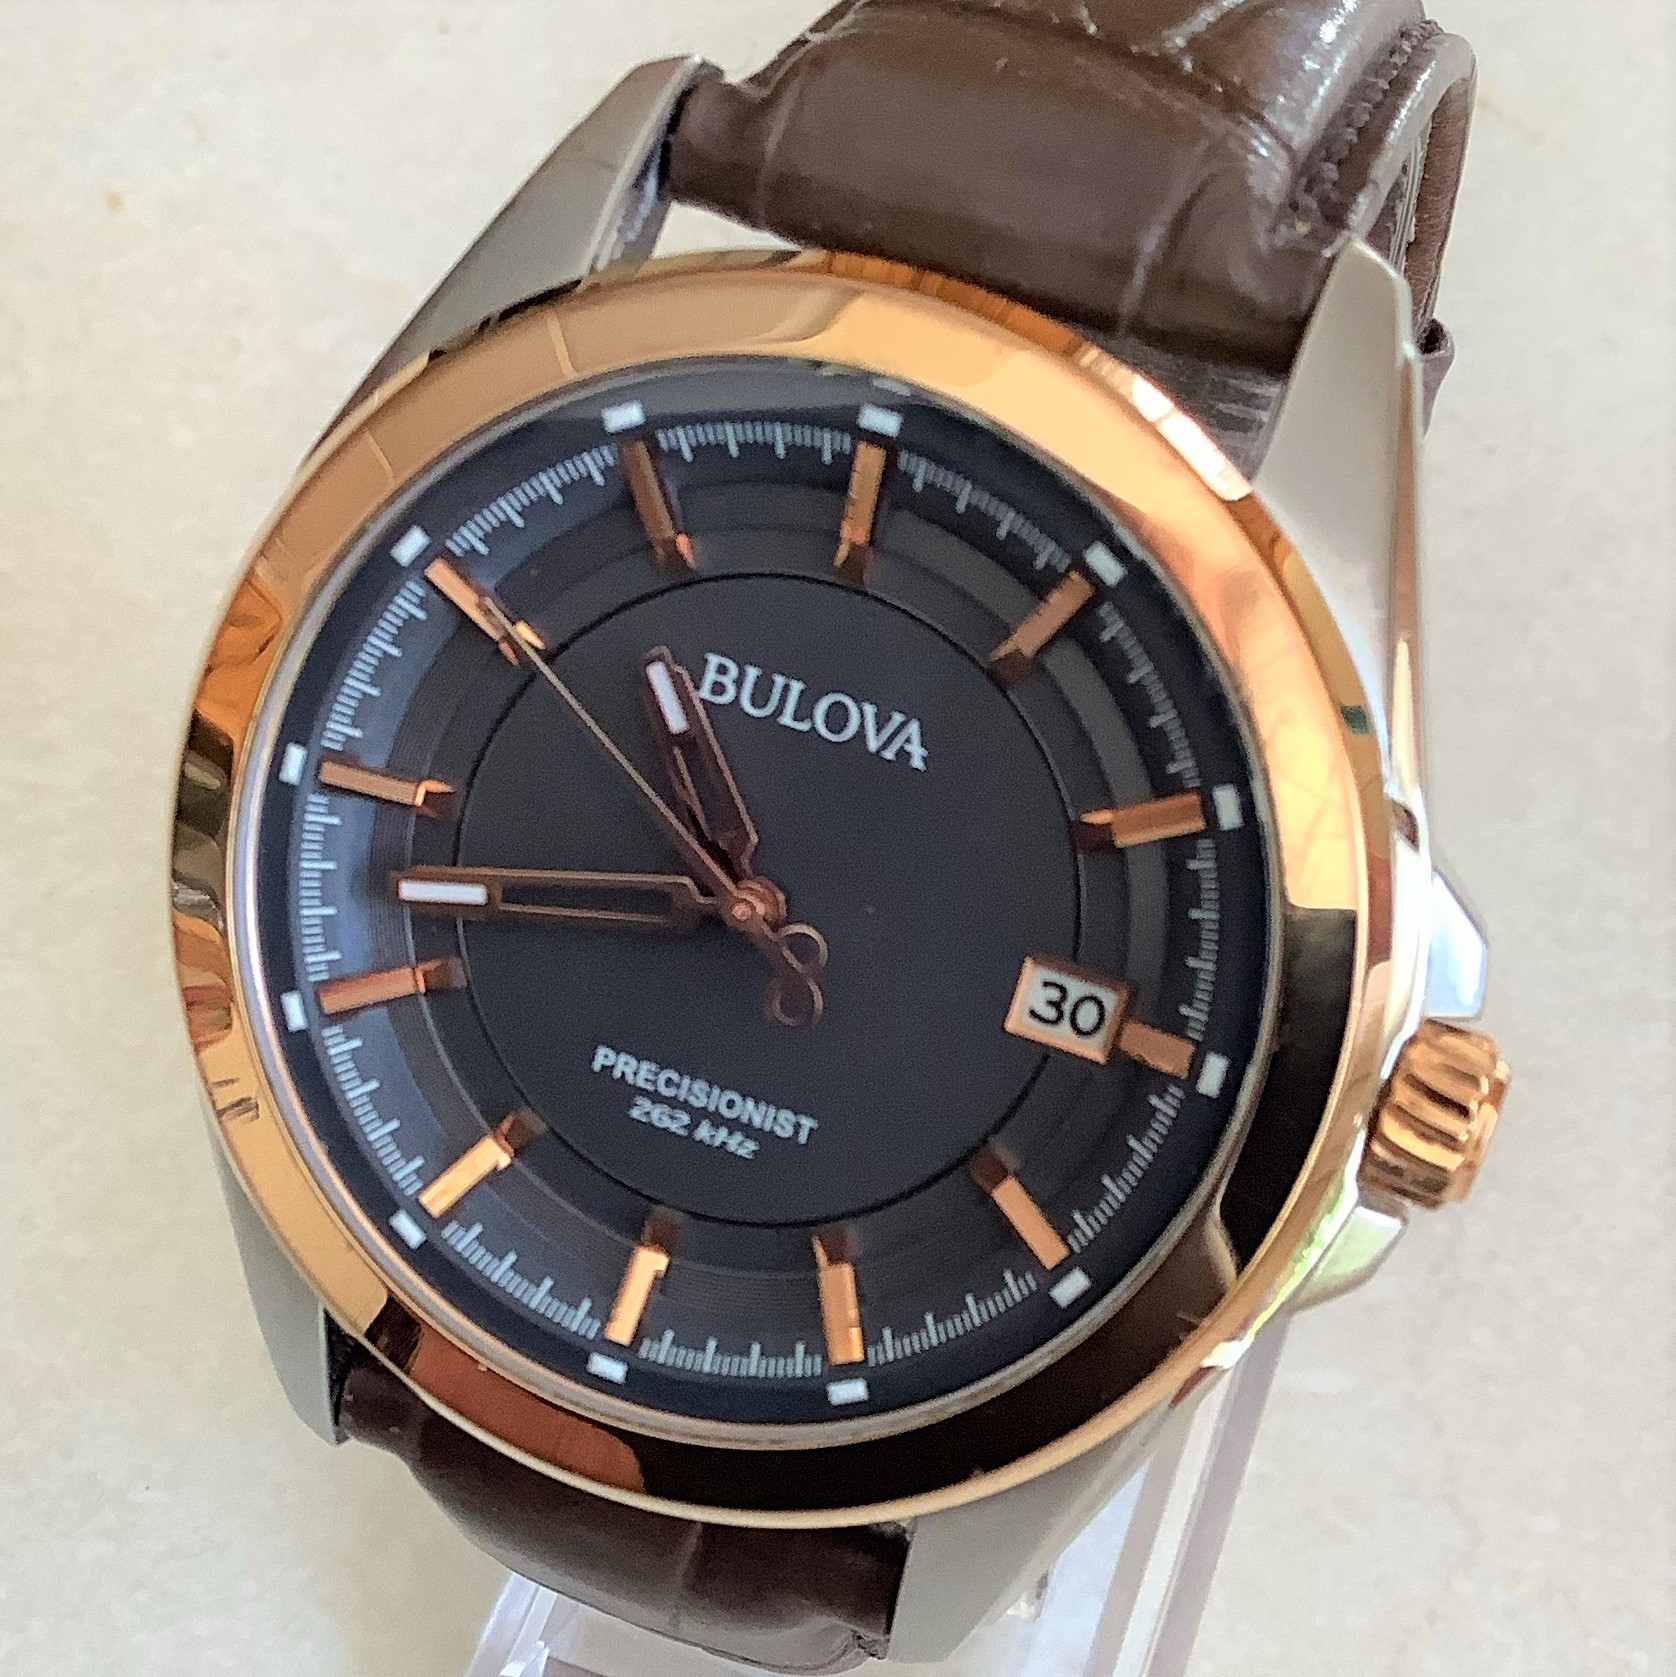 Bulova Precisionist wristwatch in stainless steel with gold-filled bezel on leather band